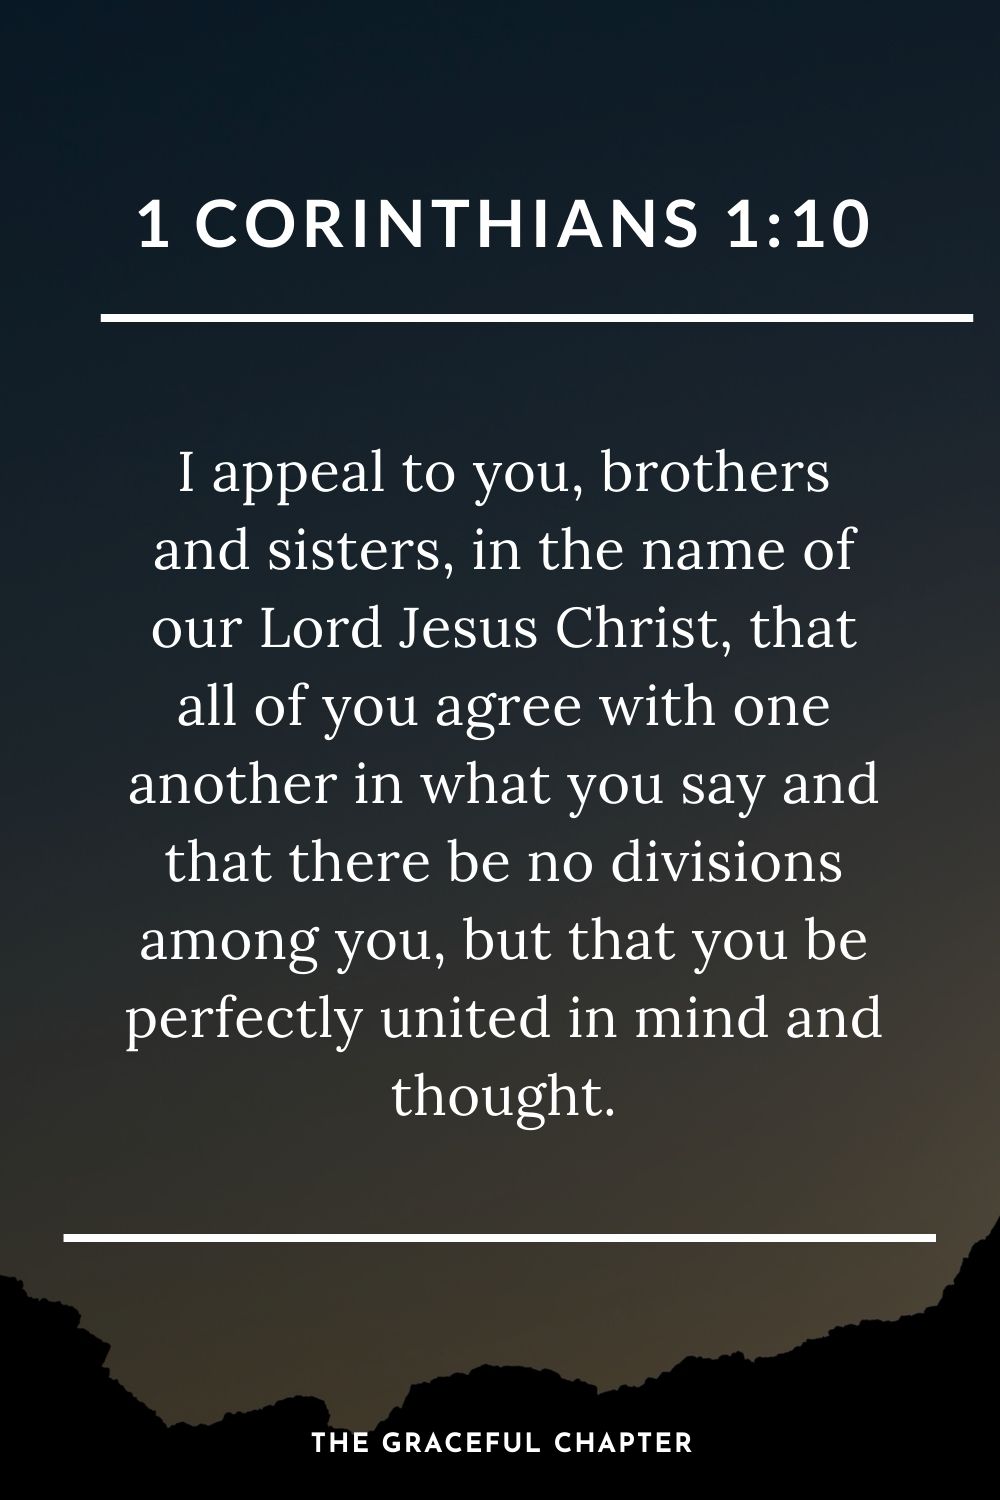 I appeal to you, brothers and sisters, in the name of our Lord Jesus Christ, that all of you agree with one another in what you say and that there be no divisions among you, but that you be perfectly united in mind and thought. 1 Corinthians 1:10